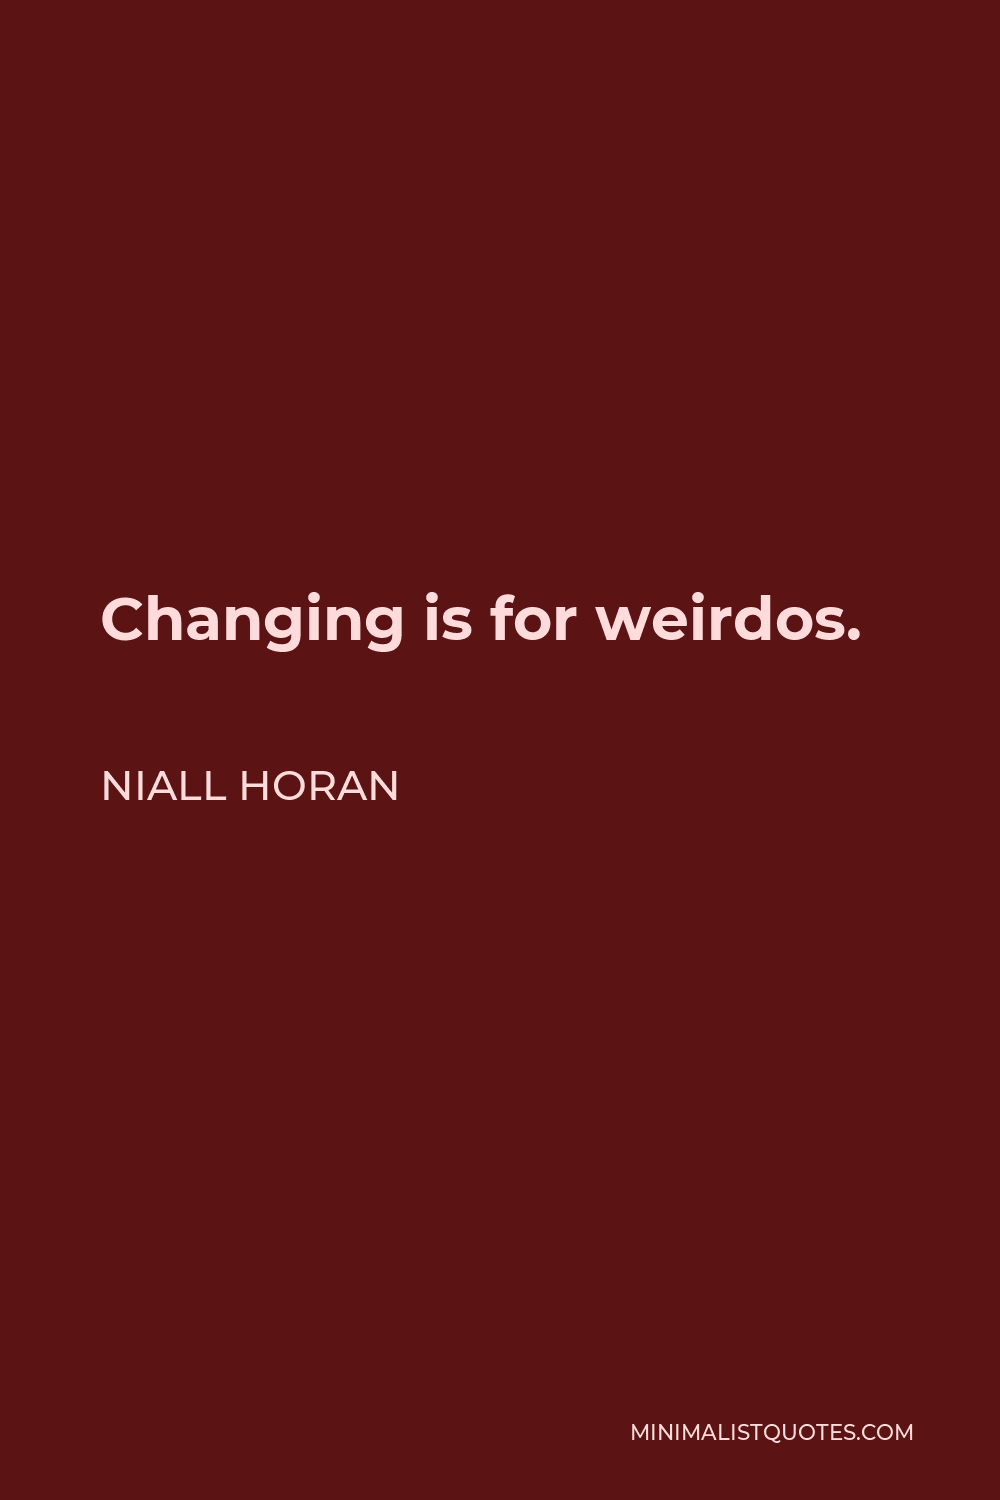 Niall Horan Quote - Changing is for weirdos.